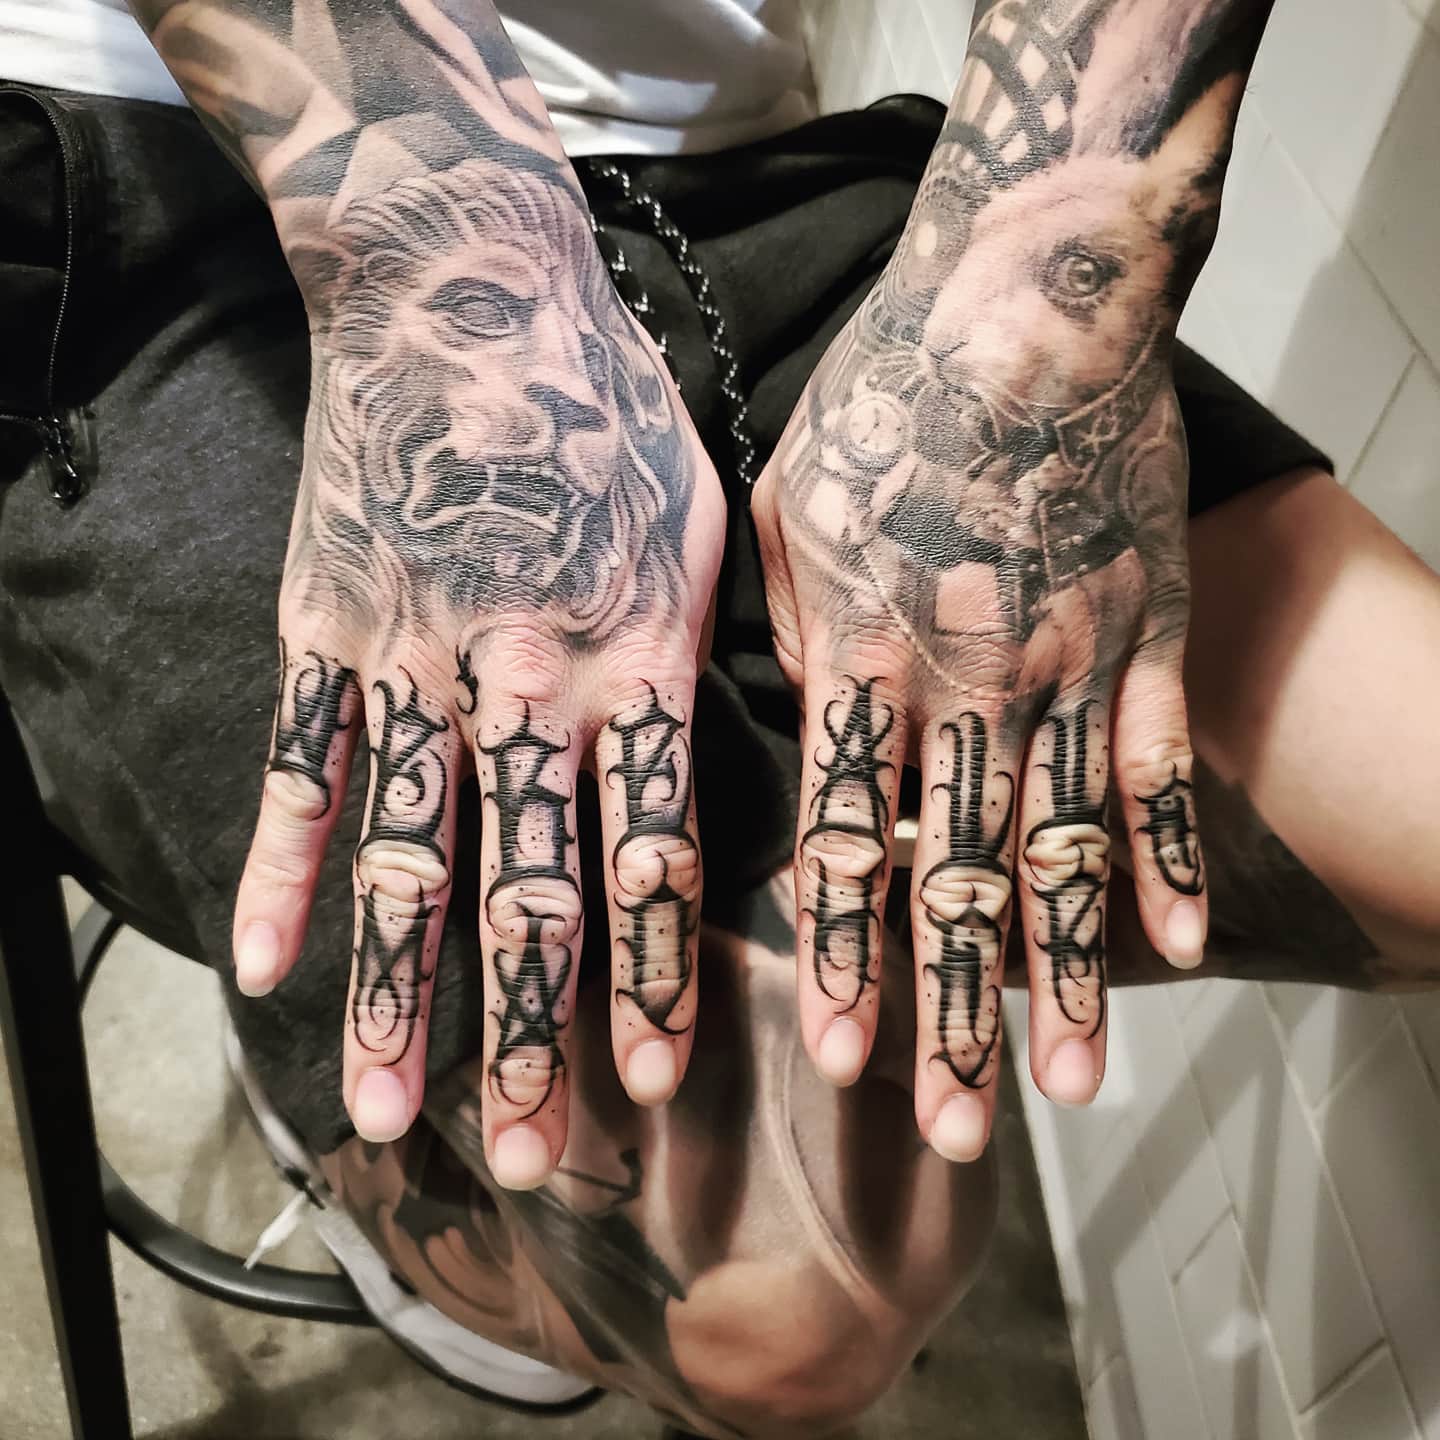 13 kewl knuckle tattoo ideas to get inked this Cyber Monday  Rock Paper  Shotgun